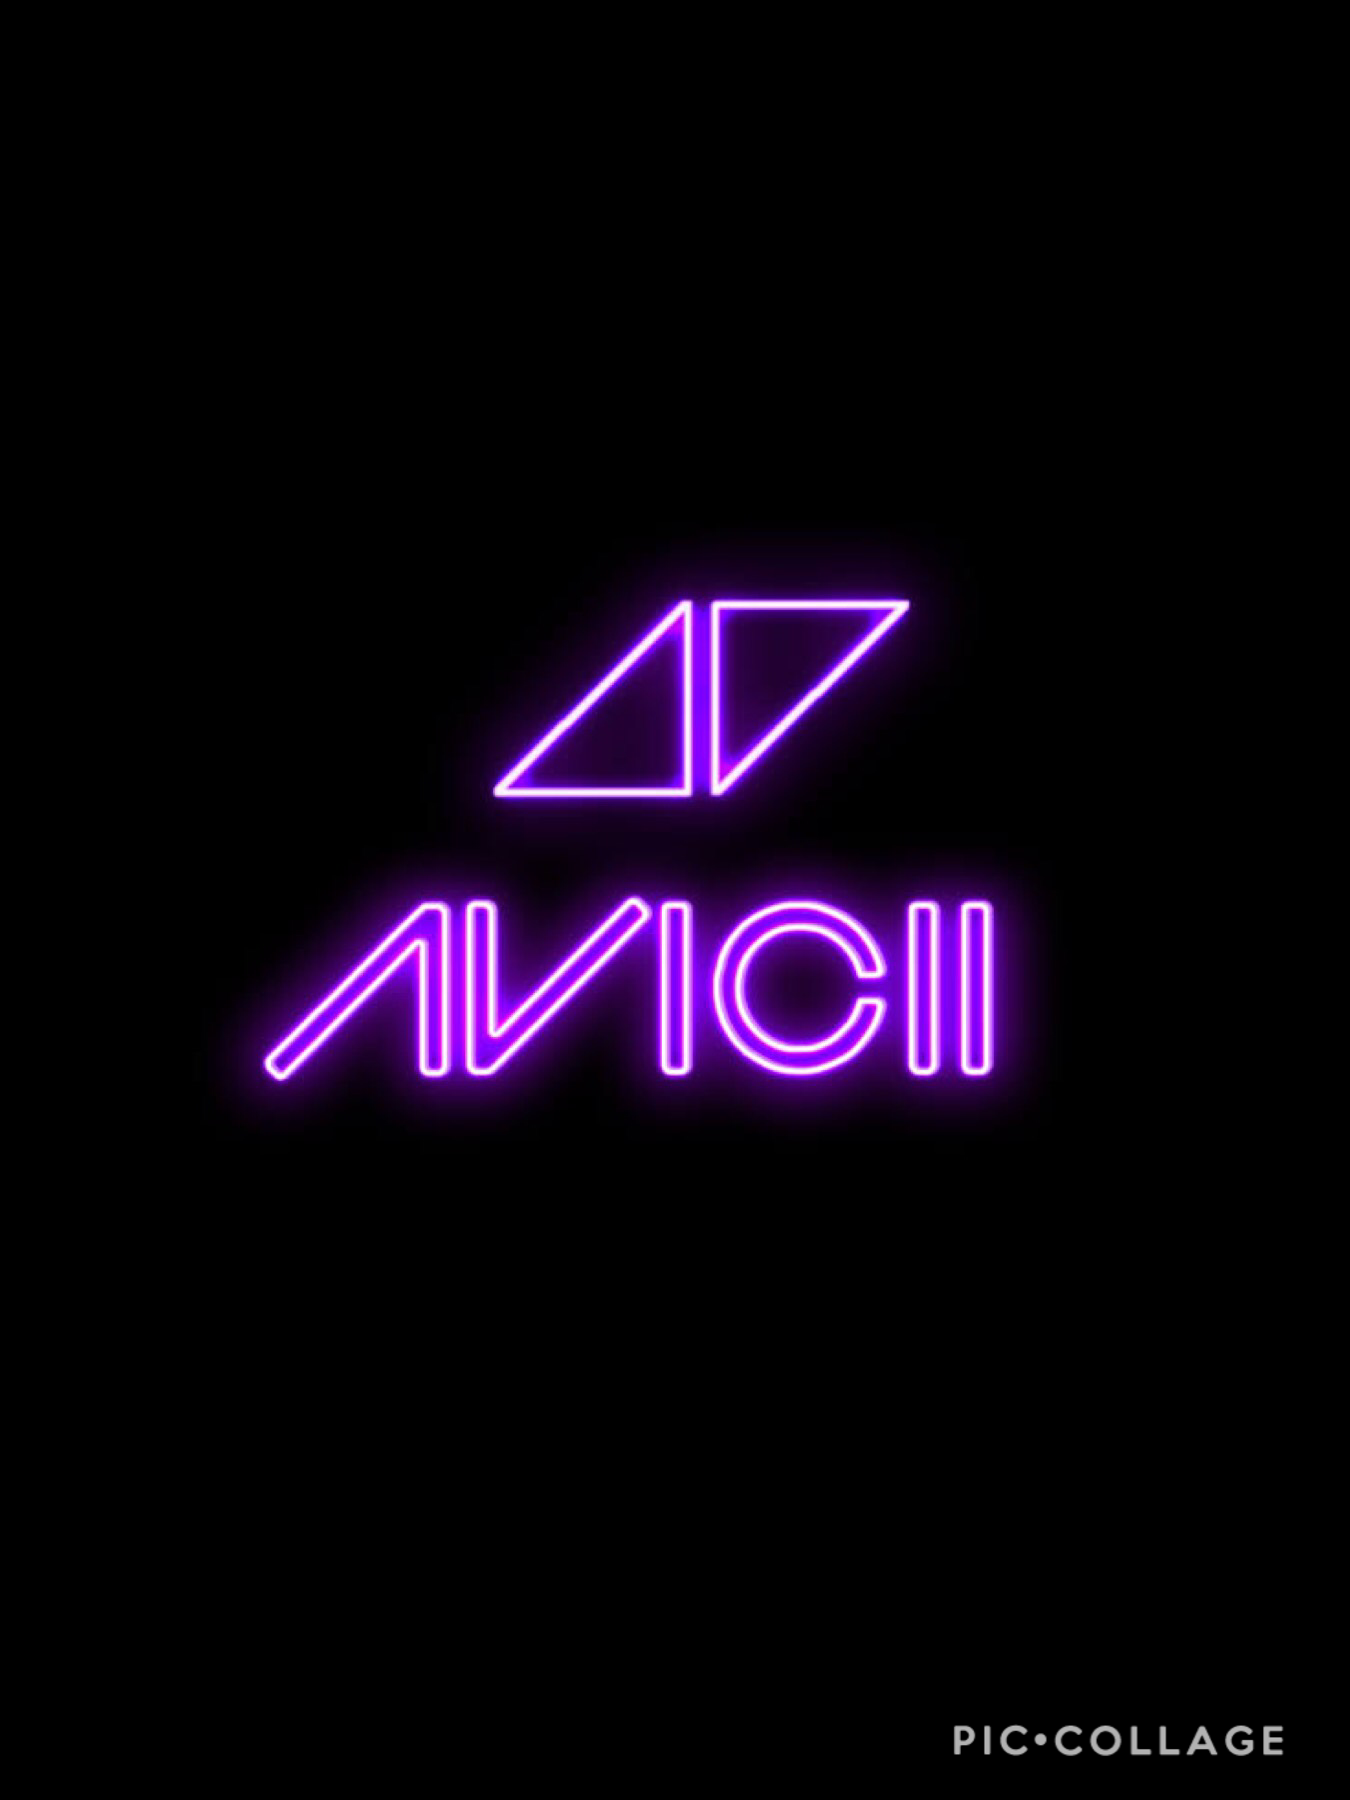 Amazing Wallpaper for Ur lock screen or home screen, keeping Avicii's death in mind :(